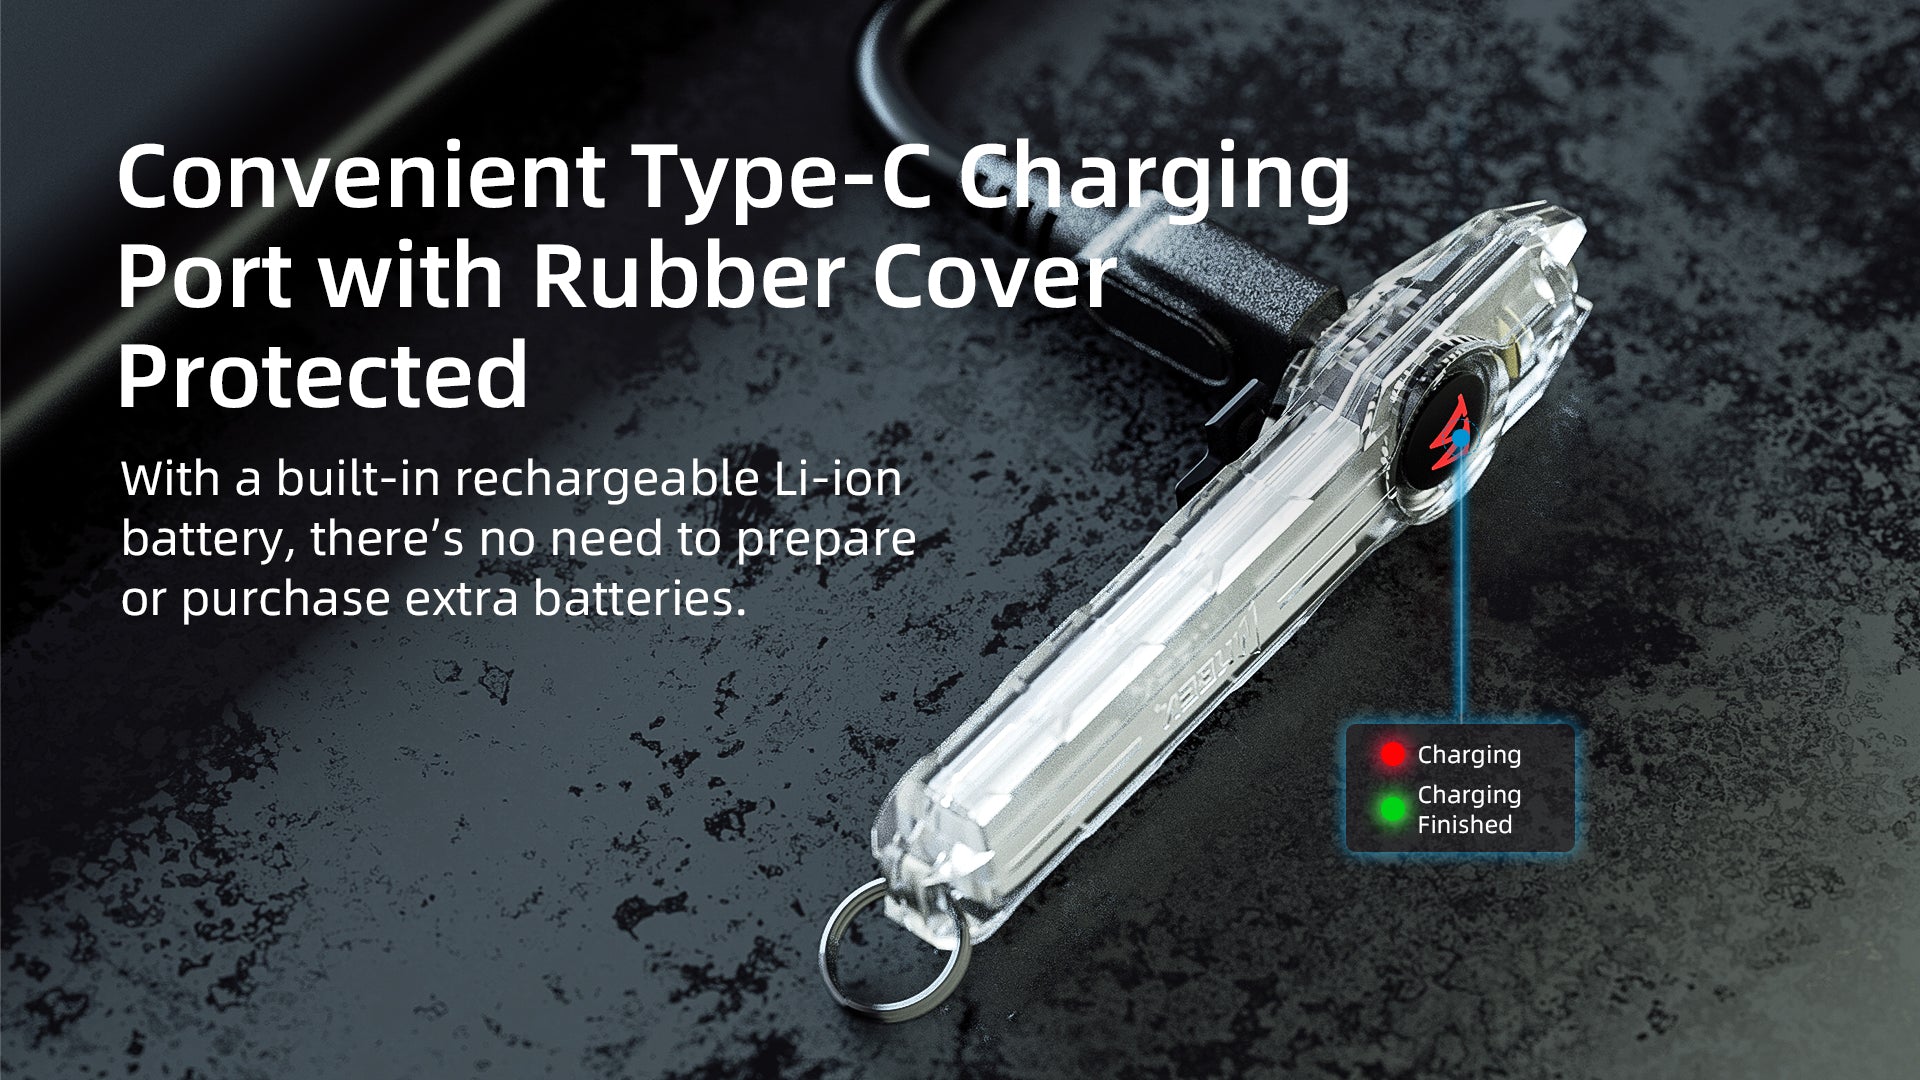 Convenient Type-C Charging Port with Rubber Cover Protected